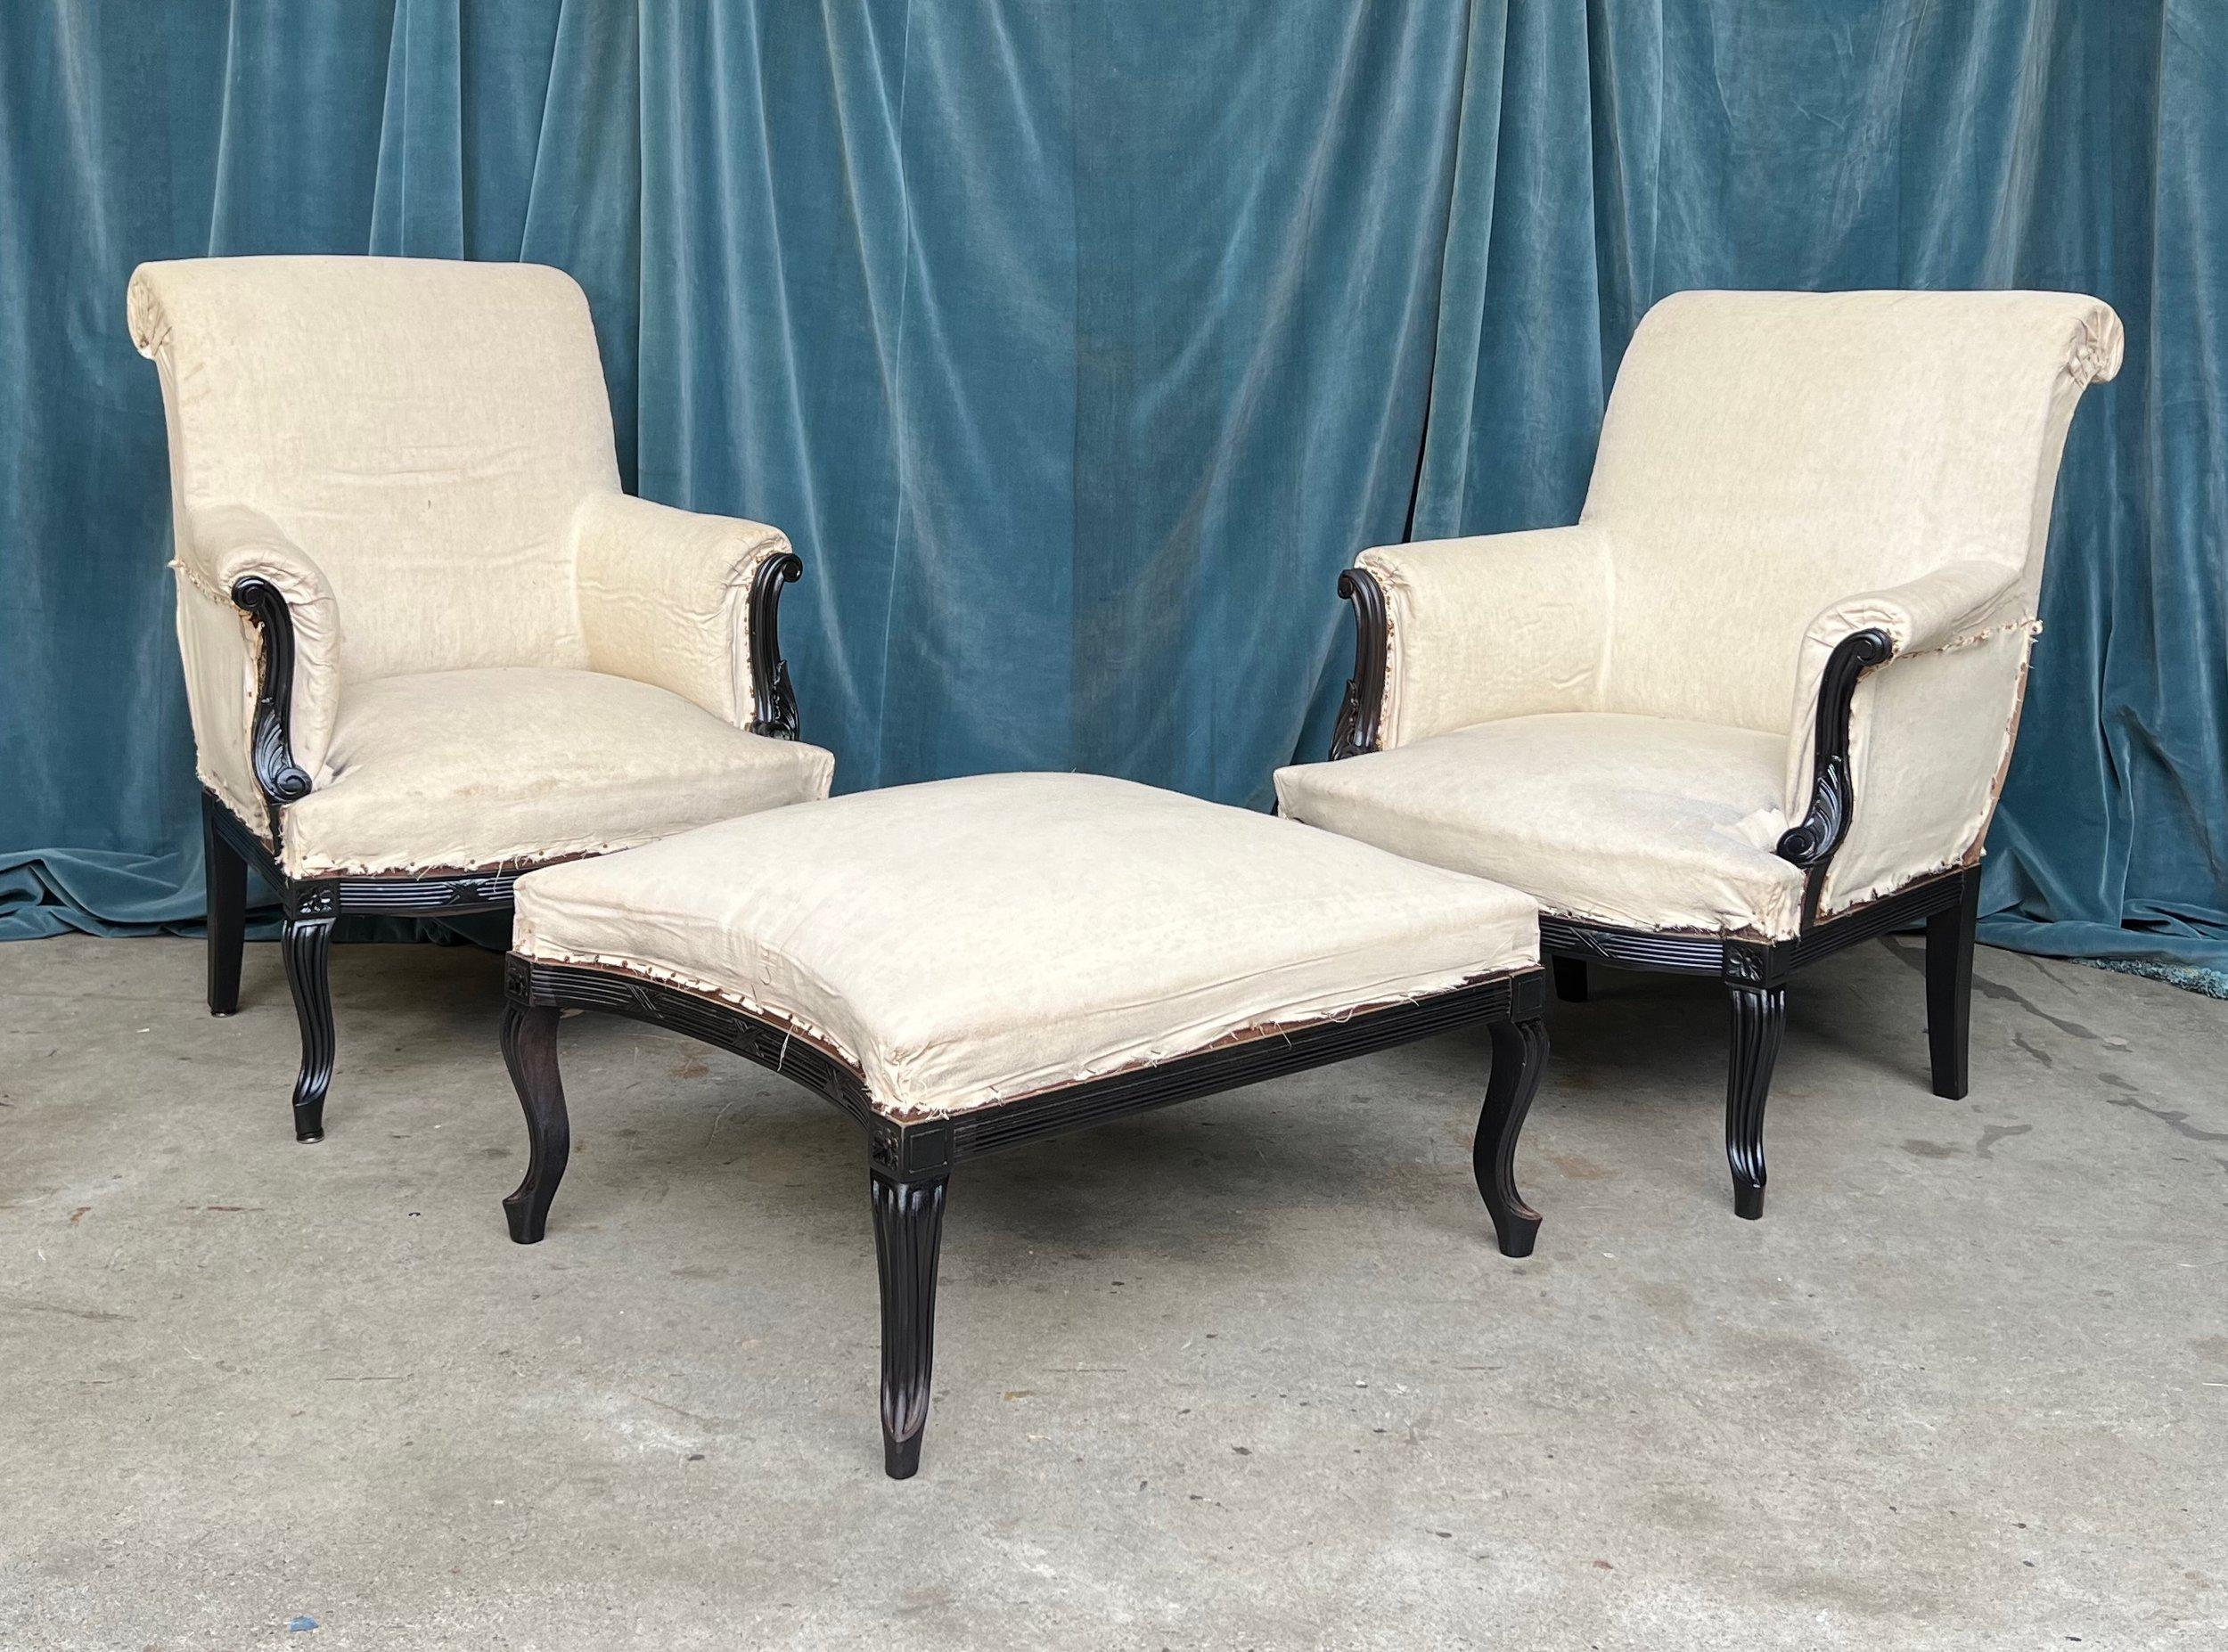 This striking trio of French armchairs and an ottoman from the 1920s is the embodiment of timeless elegance. The chairs and ottoman are a testament to fine artistry, with intricately carved wooden frameworks that have been freshly painted in a sleek